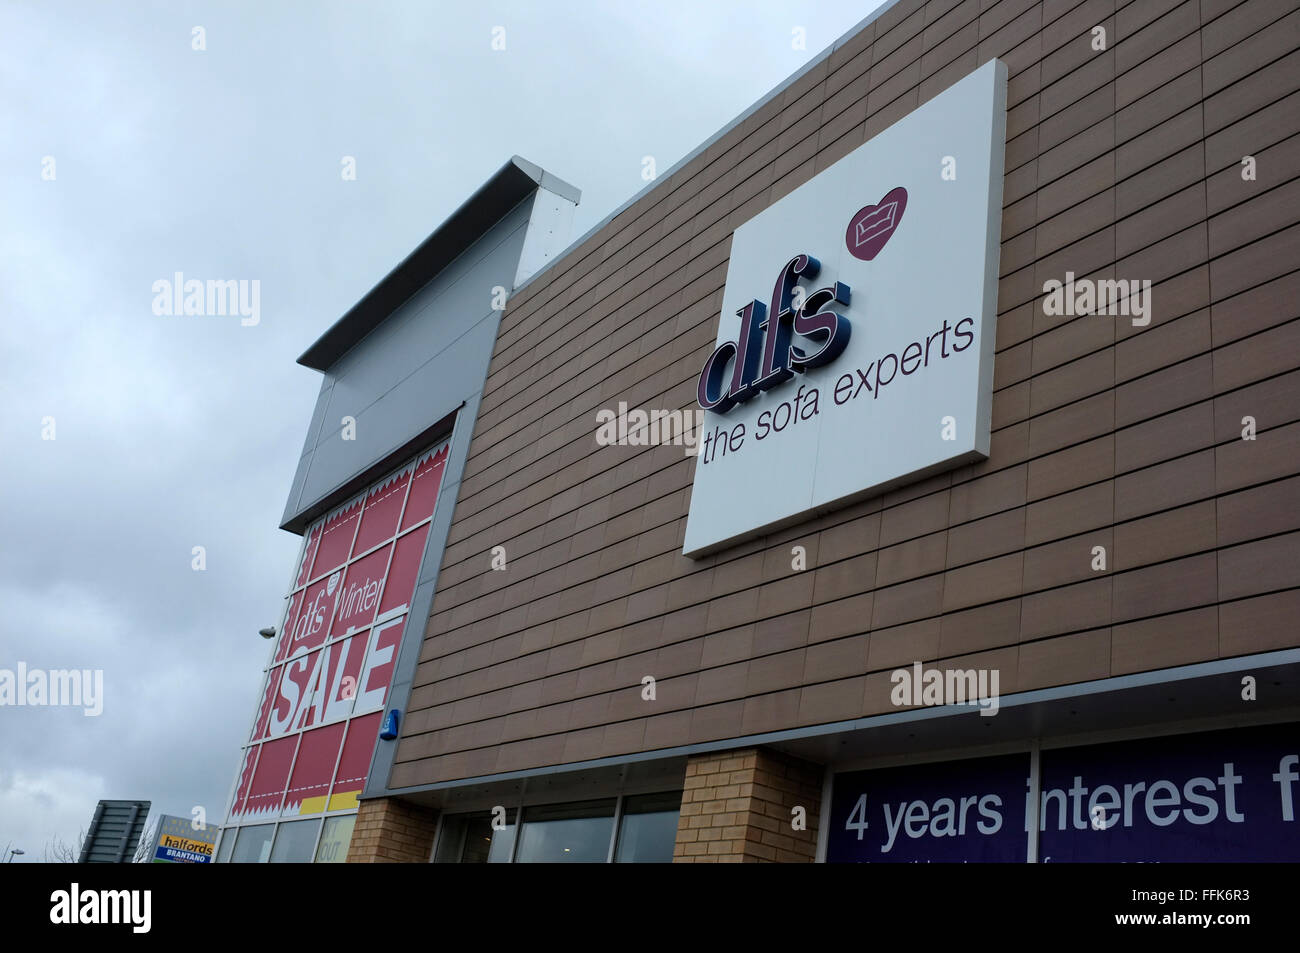 dfs the sofa experts store in westwood cross thanet west kent uk february 2016 Stock Photo